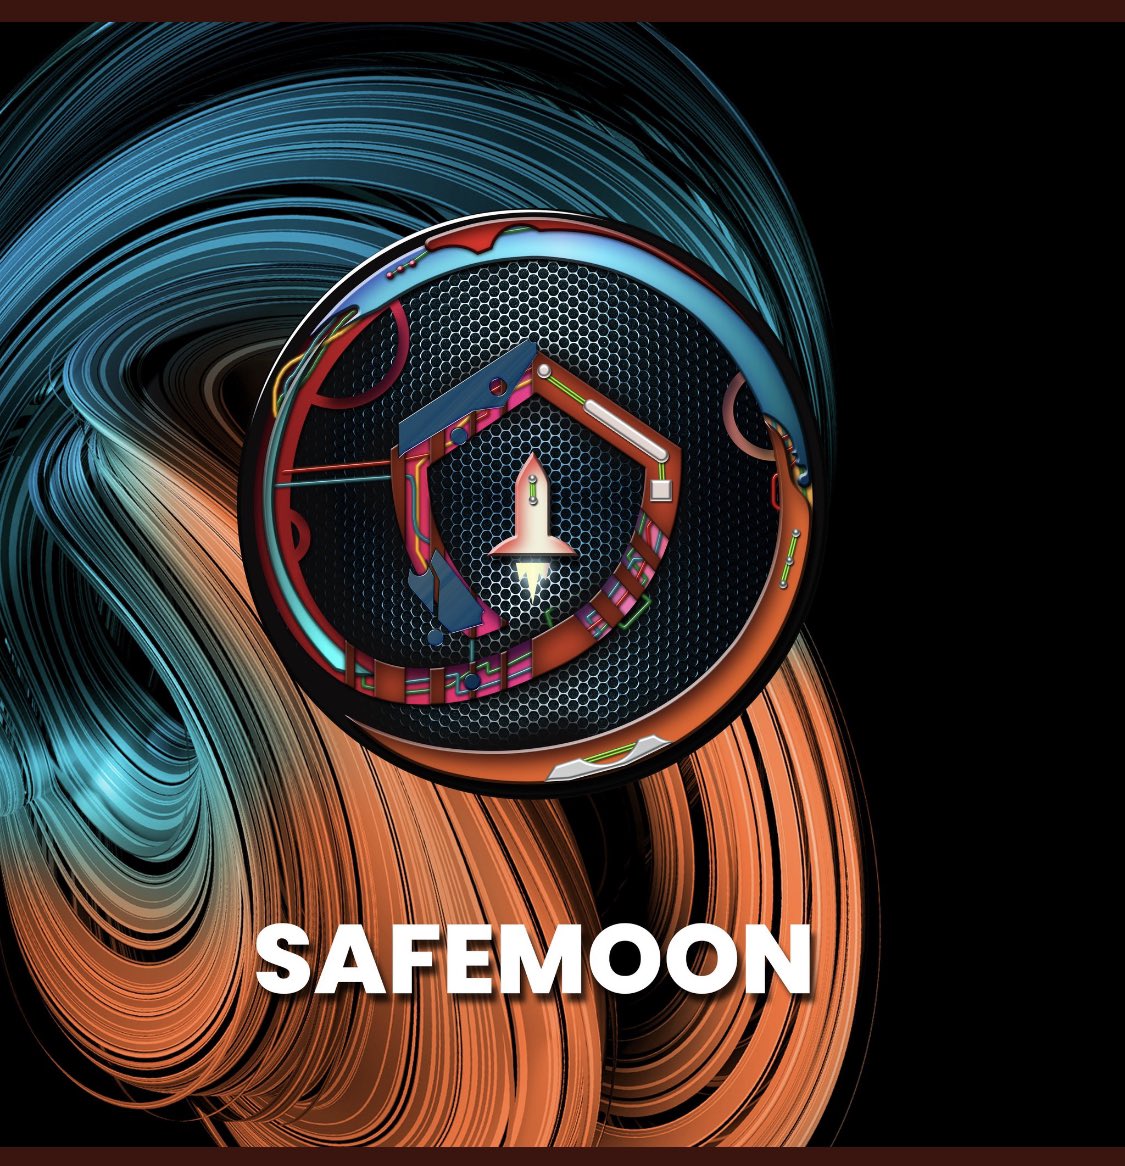 #safemoonarmy TAKING OVER TWITTER😎💪💯